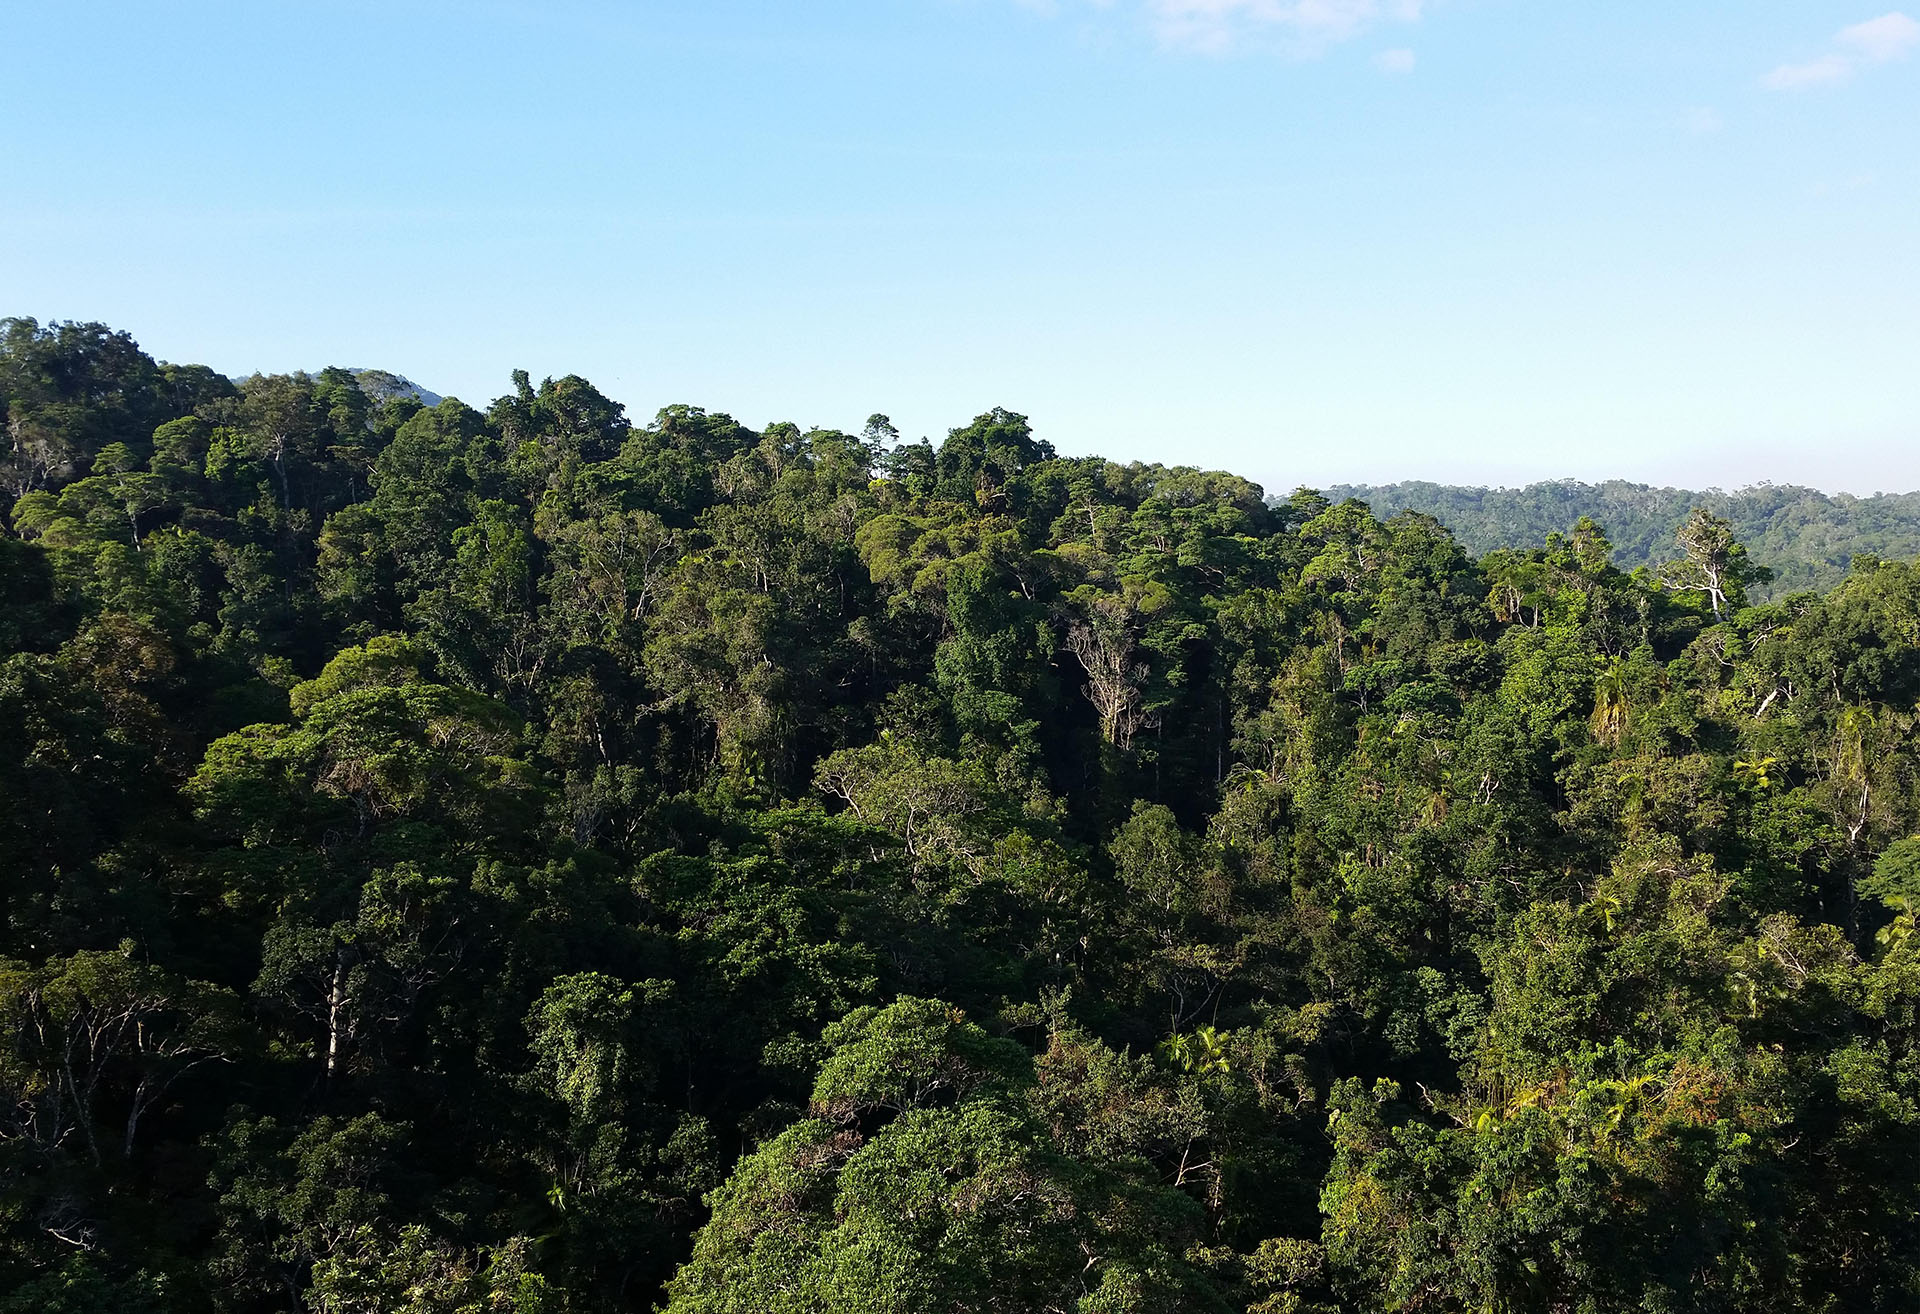 Forests provide a critical short-term solution to climate change